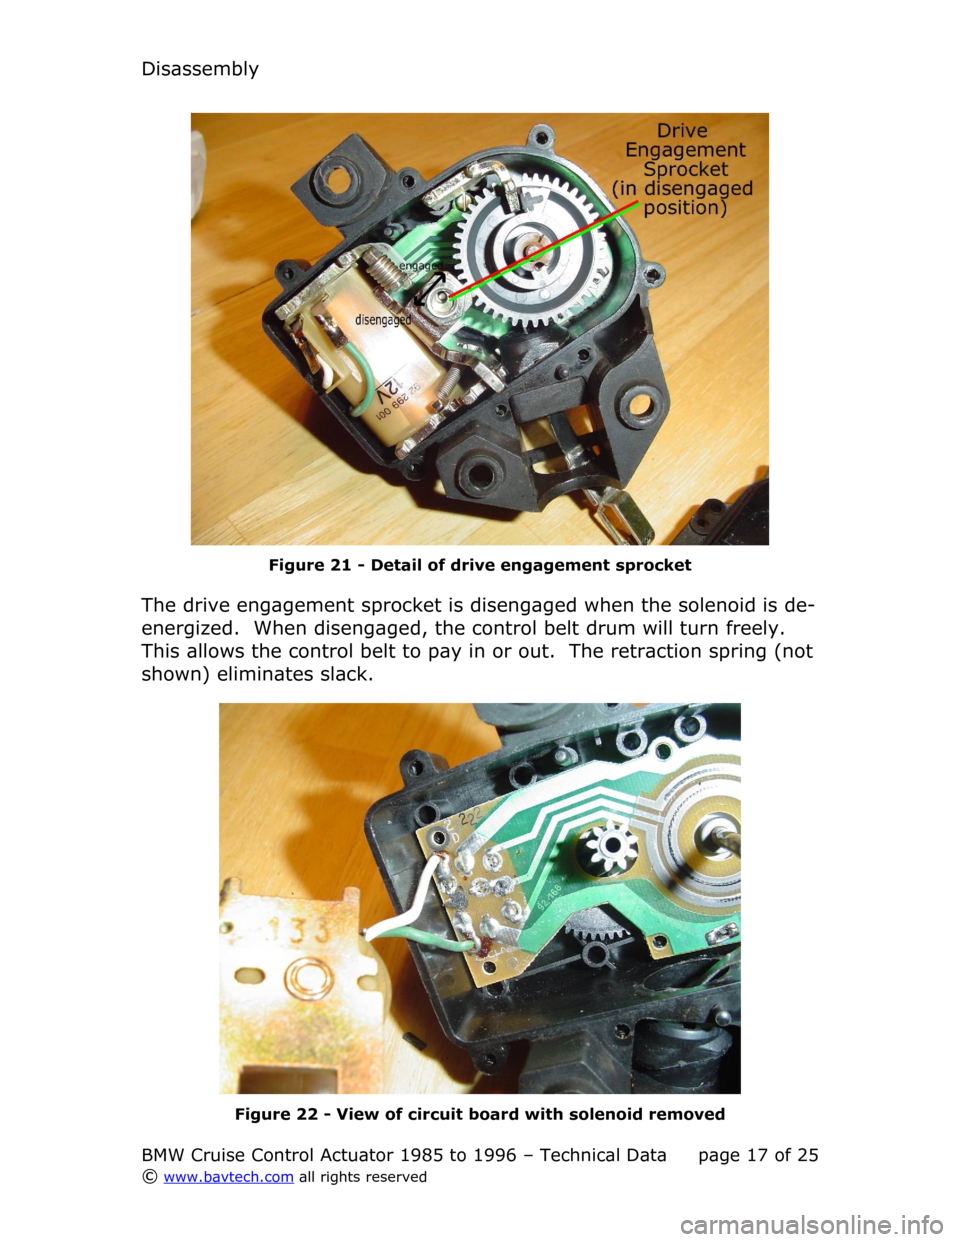 BMW 8 SERIES 1993 E31 Cruise Control Acutator Disassembly
Figure  21  - Detail of drive engagement sprocket
The drive engagement sprocket is disengaged when the solenoid is de-
energized.  When disengaged, the control belt drum will turn freely. 